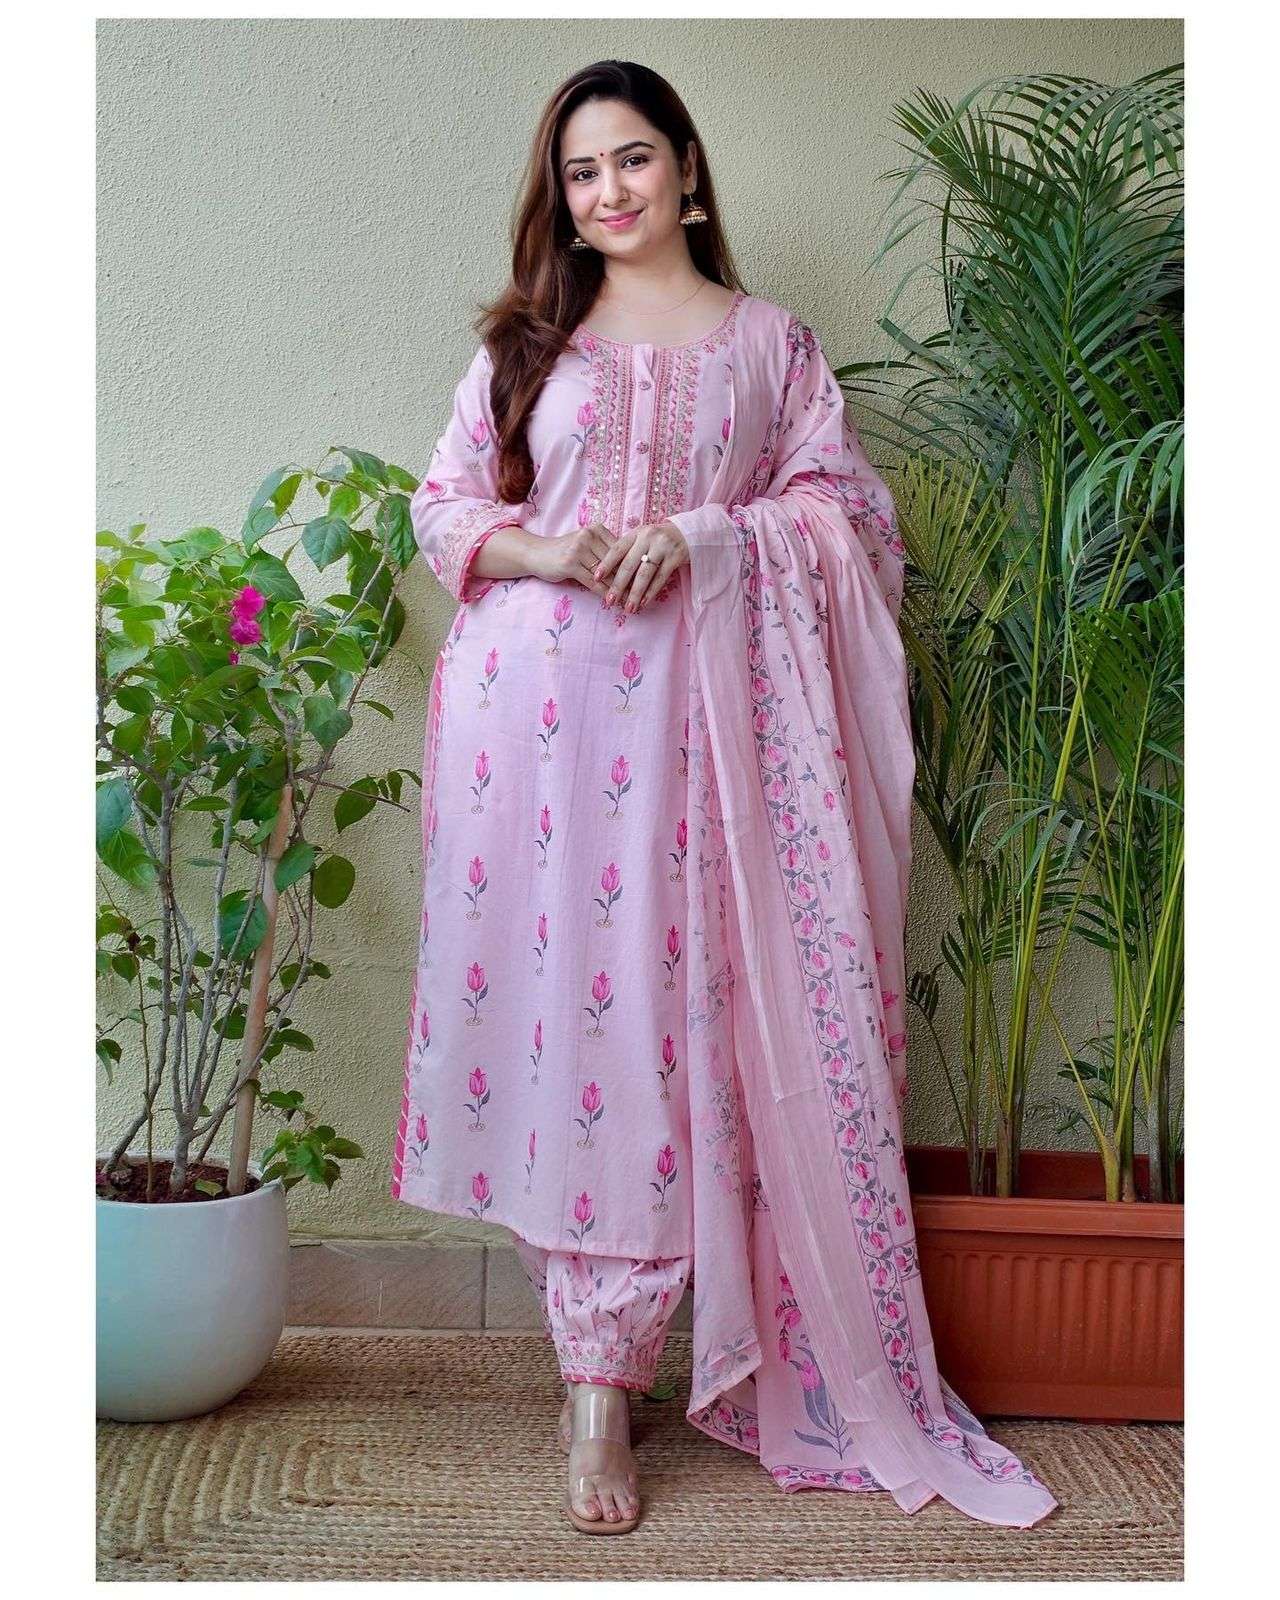 pink hand painted afghani suit afghani suit set hand painted motifs it is paired with matching afghani pants and dupatta afghani suit pink colour afghani suit set  